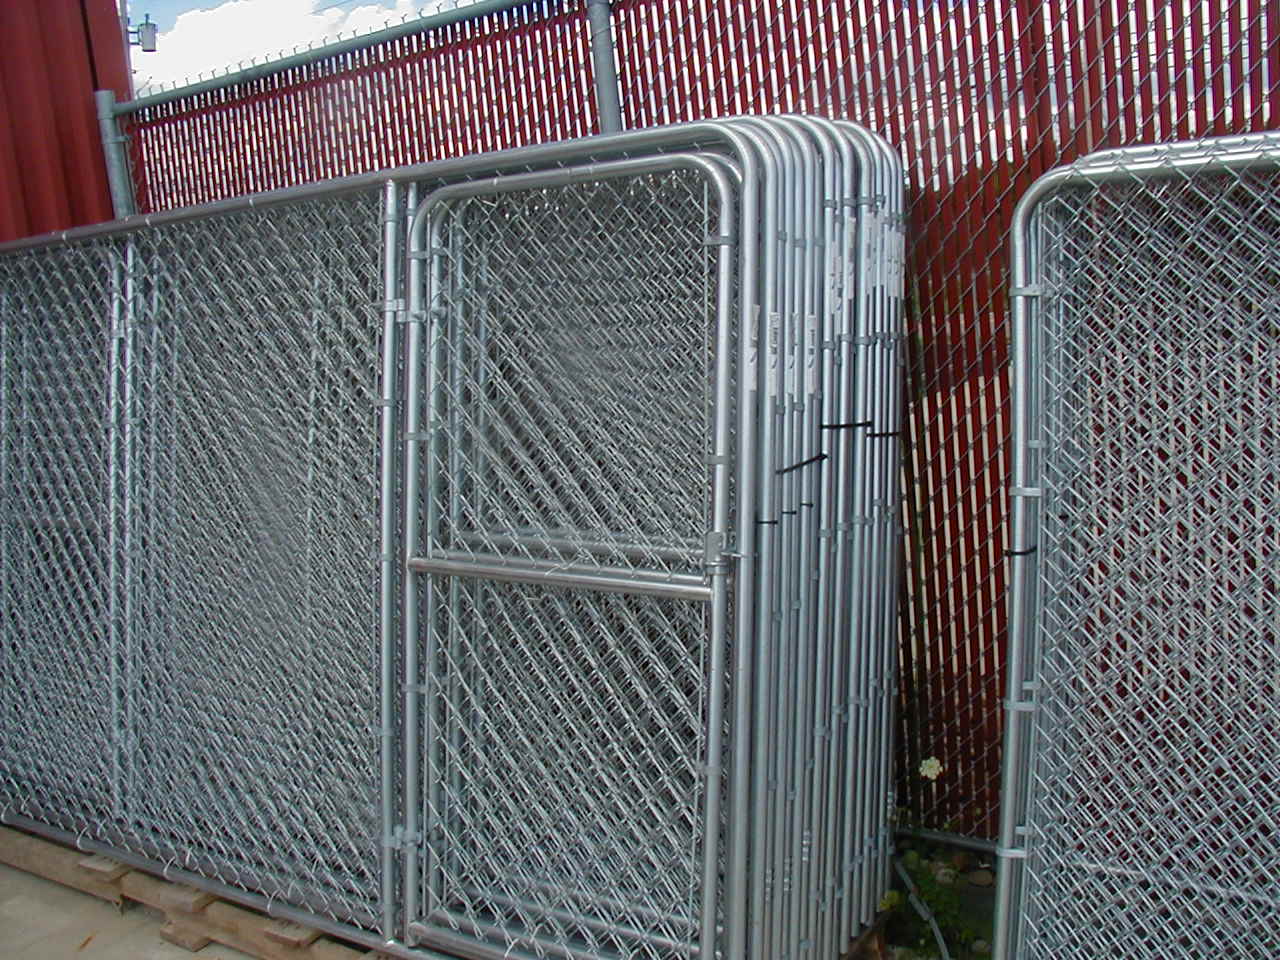 dog kennel with fence